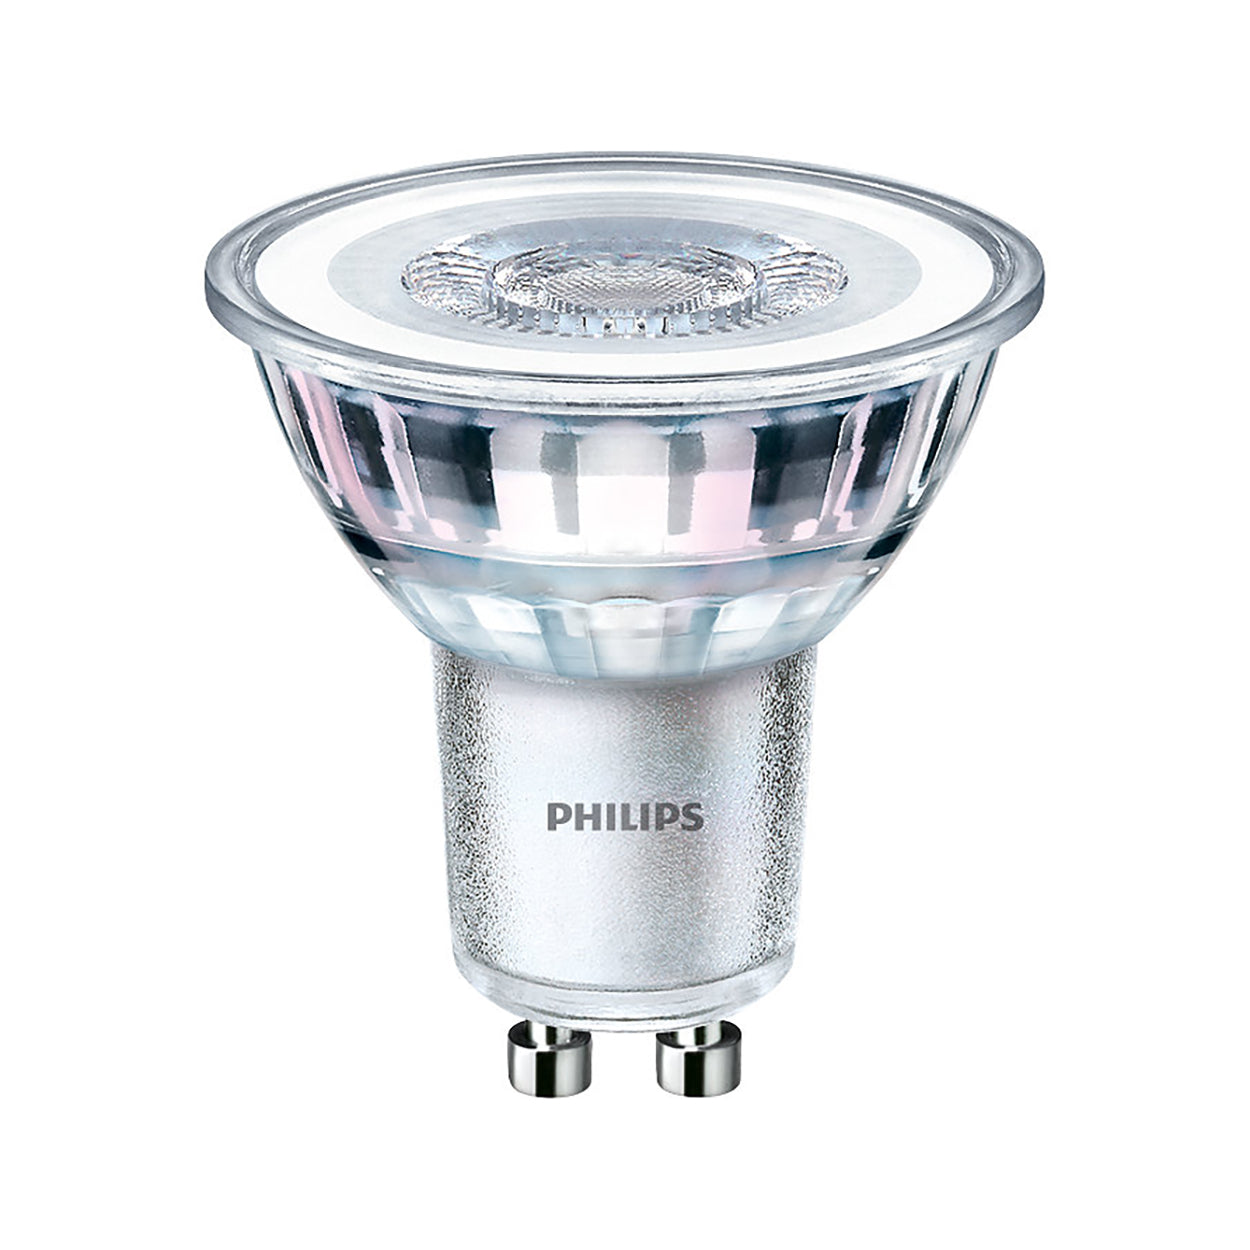 Philips Classic LED spot double pack 4.6-50W GU10 827 36° 355lm